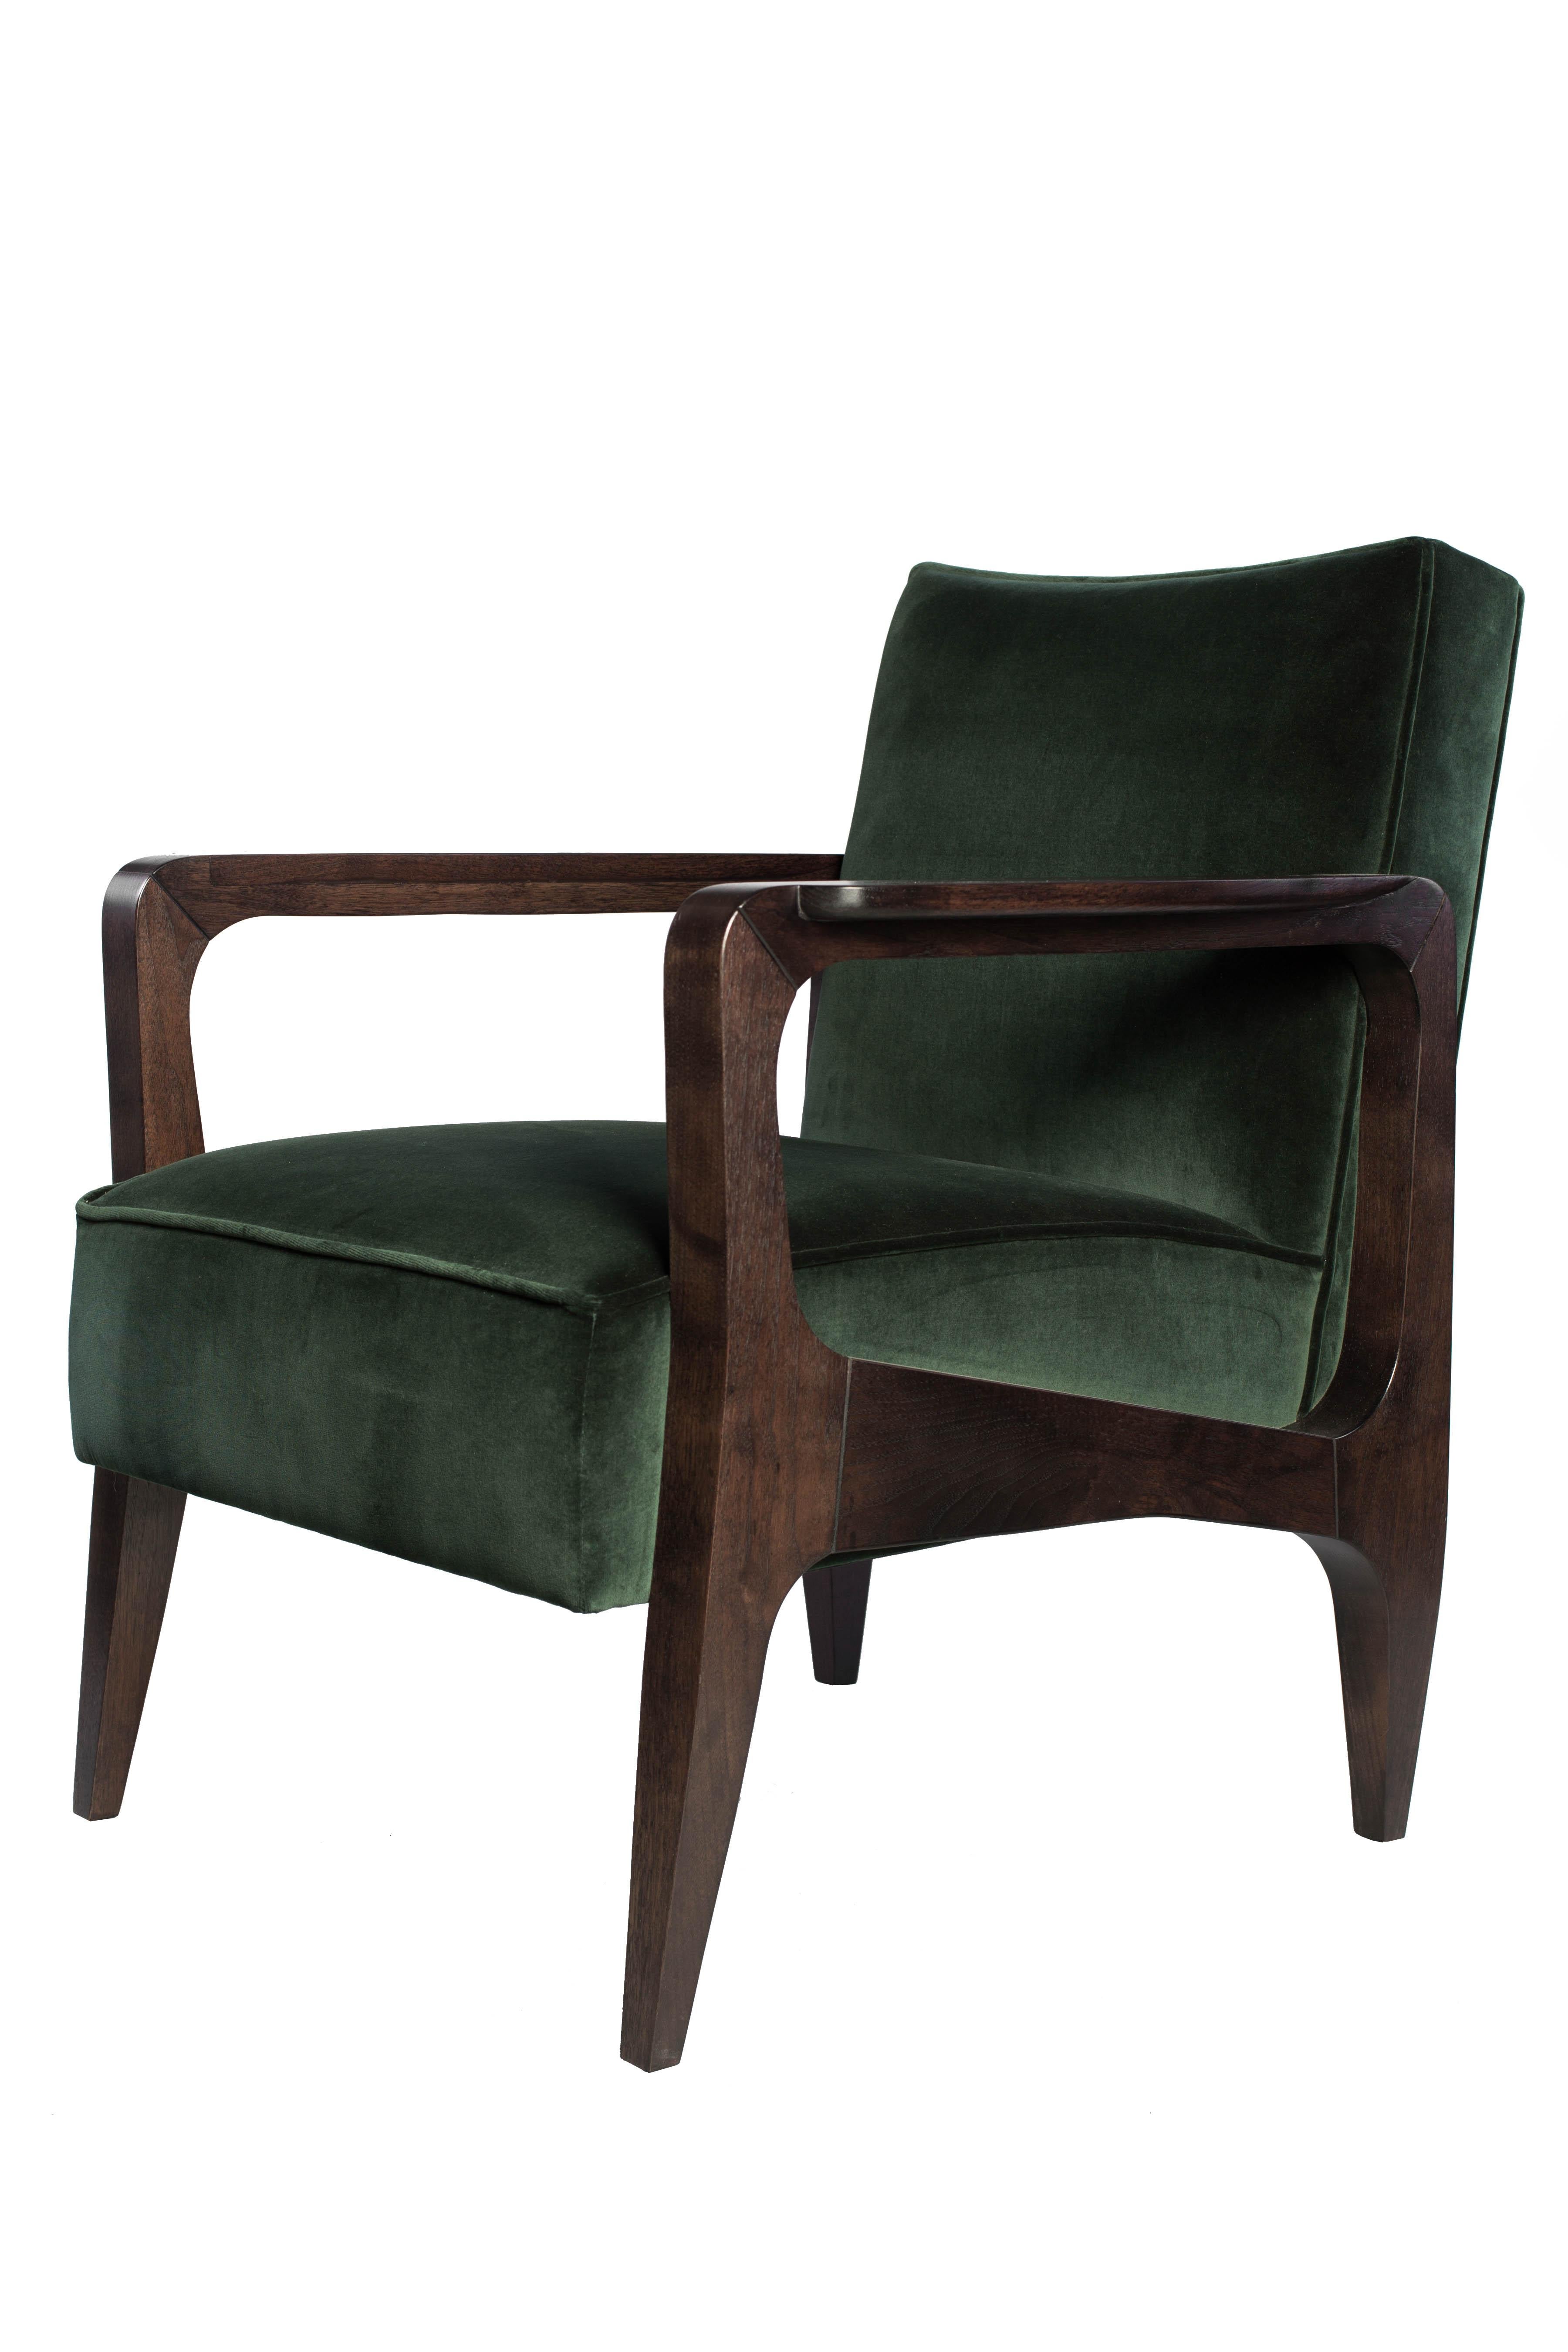 Art Deco Inspired Atena Armchair in Black America Walnut and Rio Fabric For Sale 3